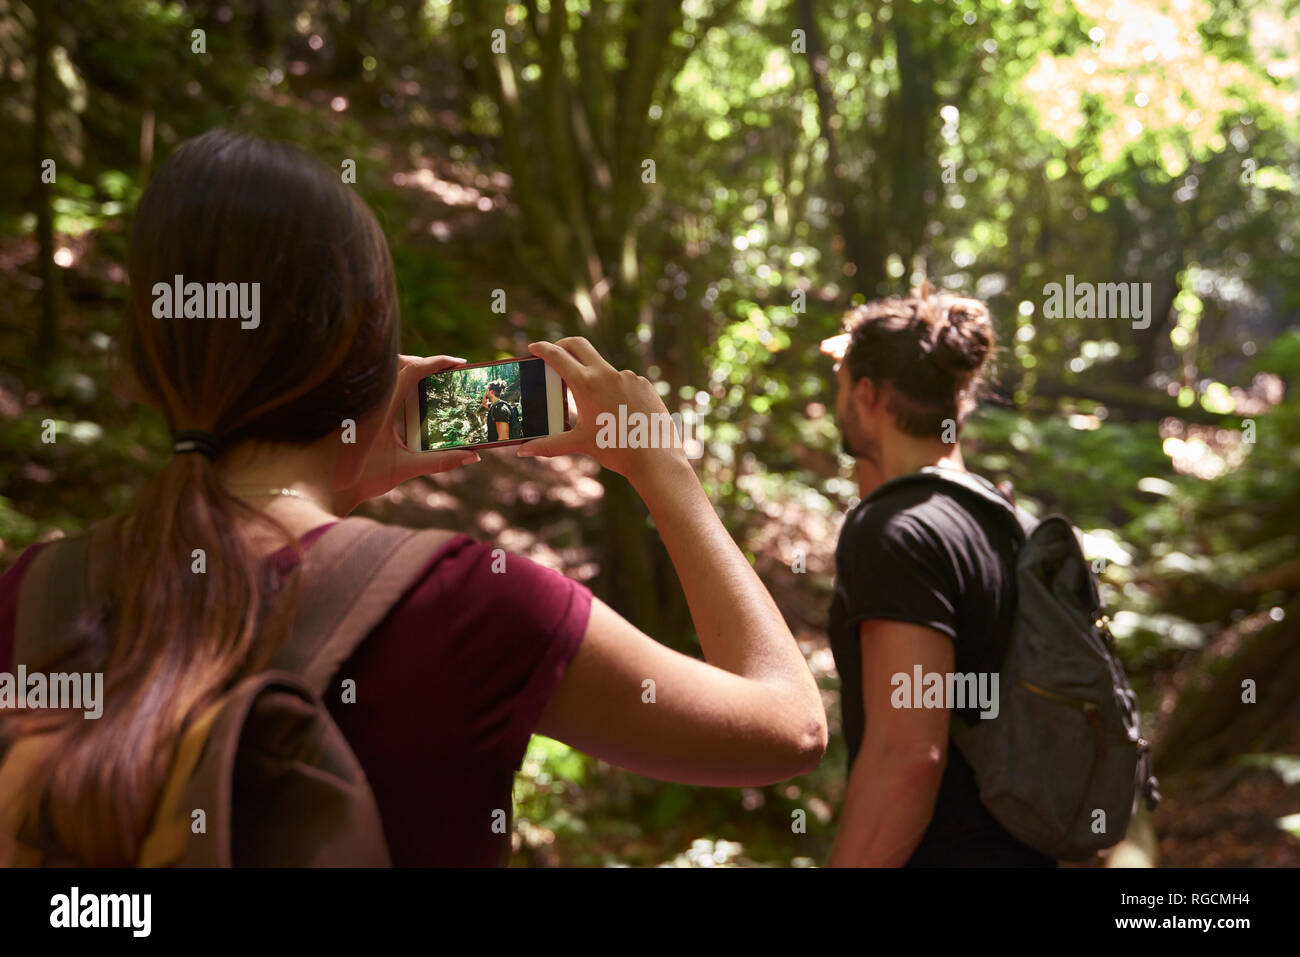 Spain, Canary Islands, La Palma, woman taking a cell phone picture of her boyfriend in a forest Stock Photo